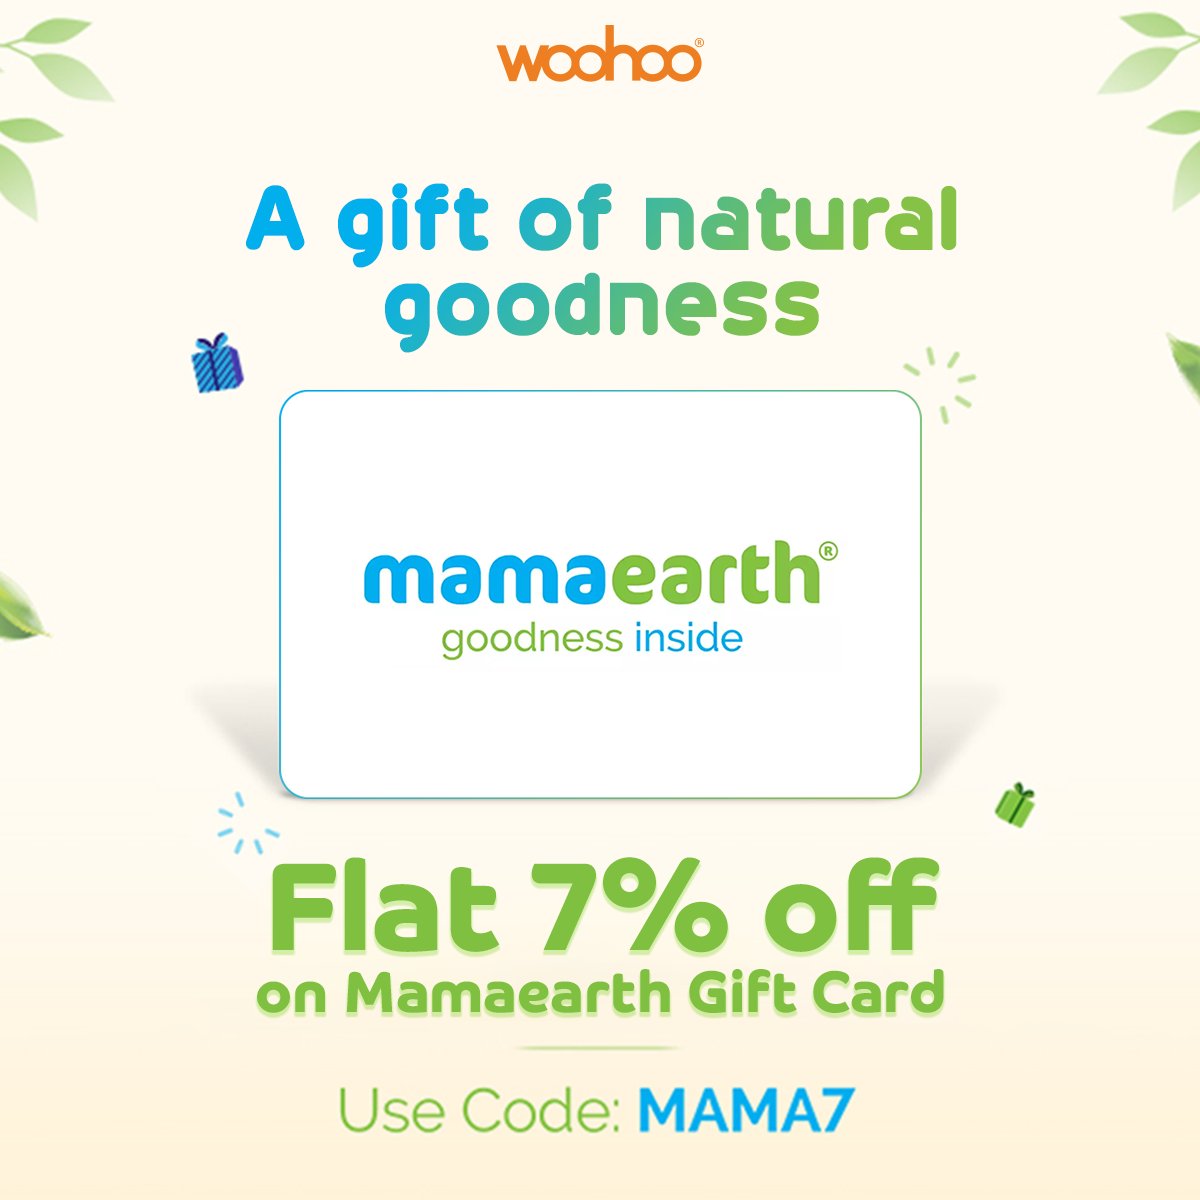 Looking for the perfect #gift for your loved ones? Give the gift of natural goodness with a #Mamaearth gift card 🎁🌿. Use Code MAMA7 at the checkout to get flat 7% off - tinyurl.com/2m63ejst

#woohoogifting #digitalgifting #GiftOfSelfCare